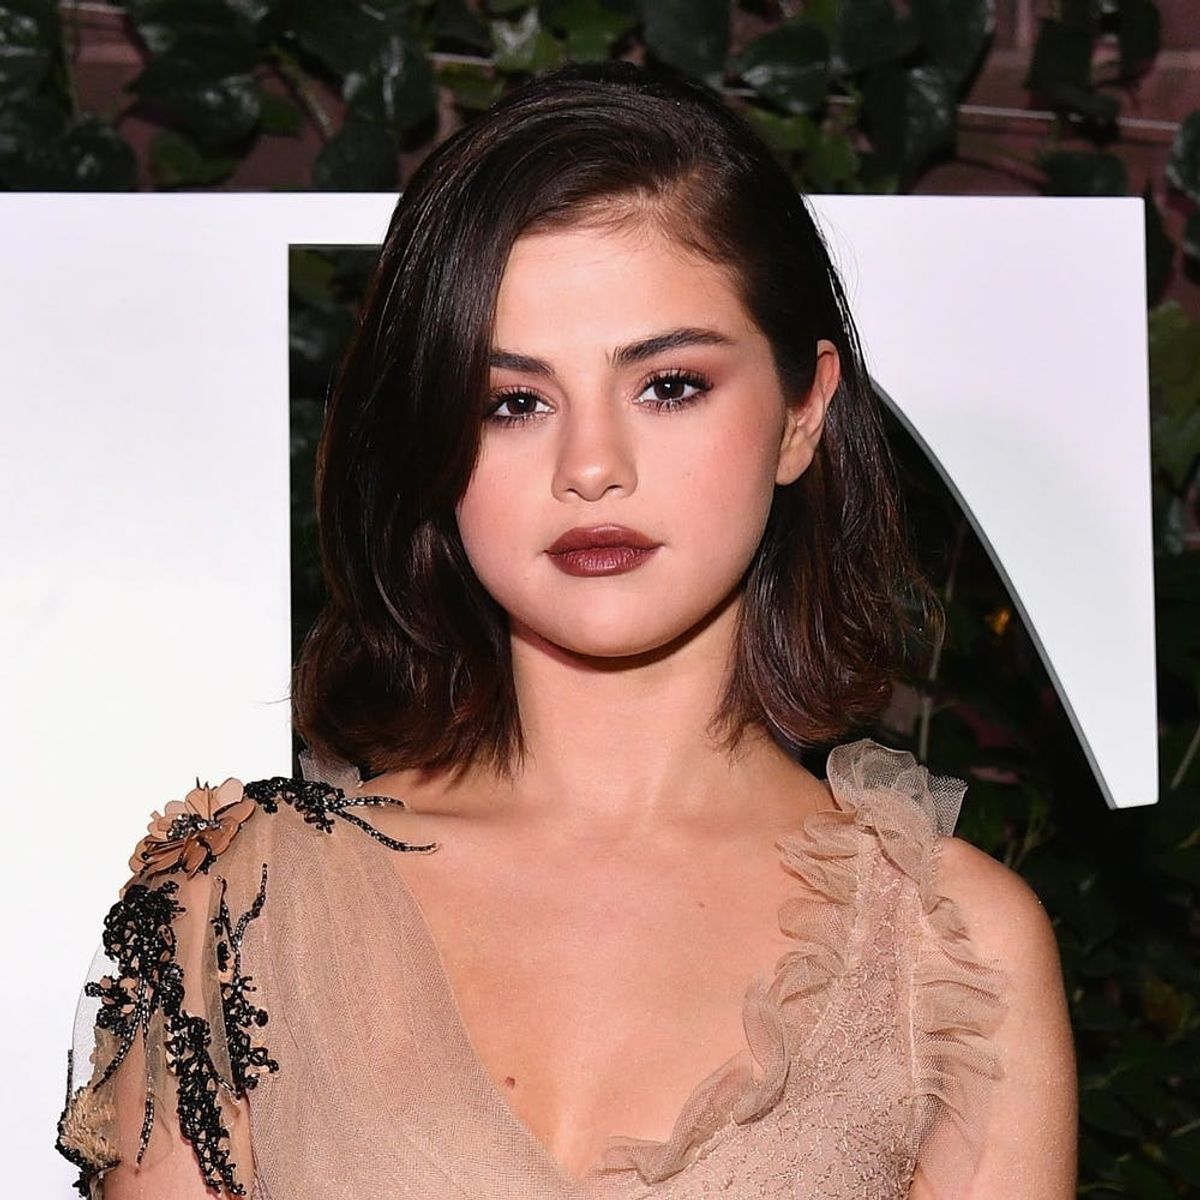 Selena Gomez Says She Feels Like She Has “No Friends”… But That’s a GOOD Thing